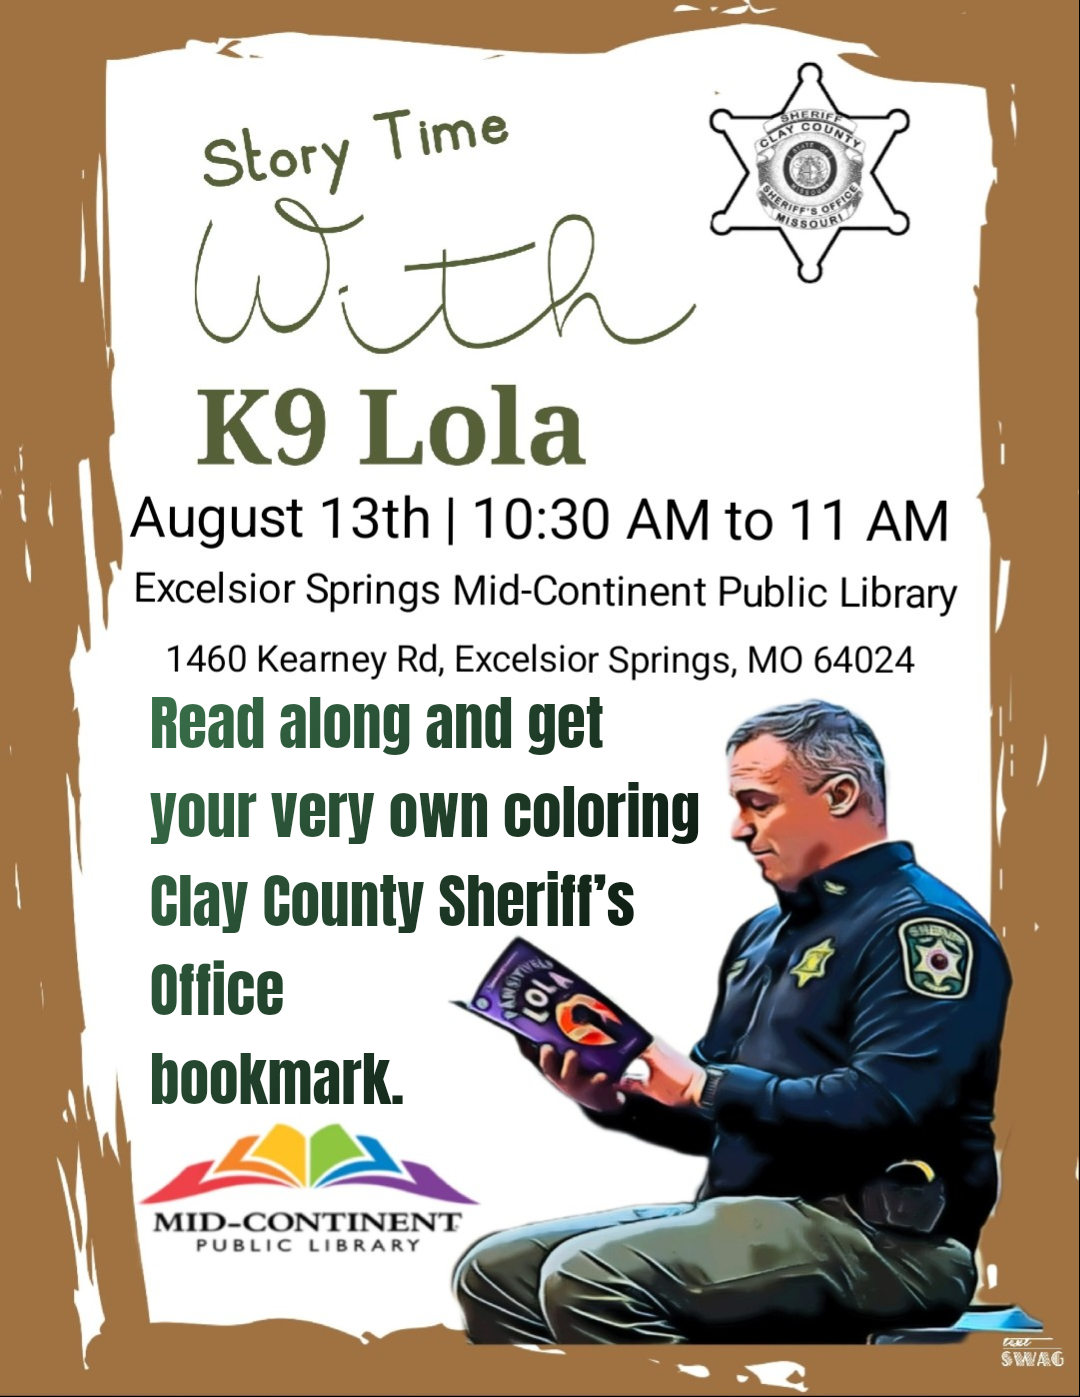 Story Time with K9 Lola - Excelsior Springs